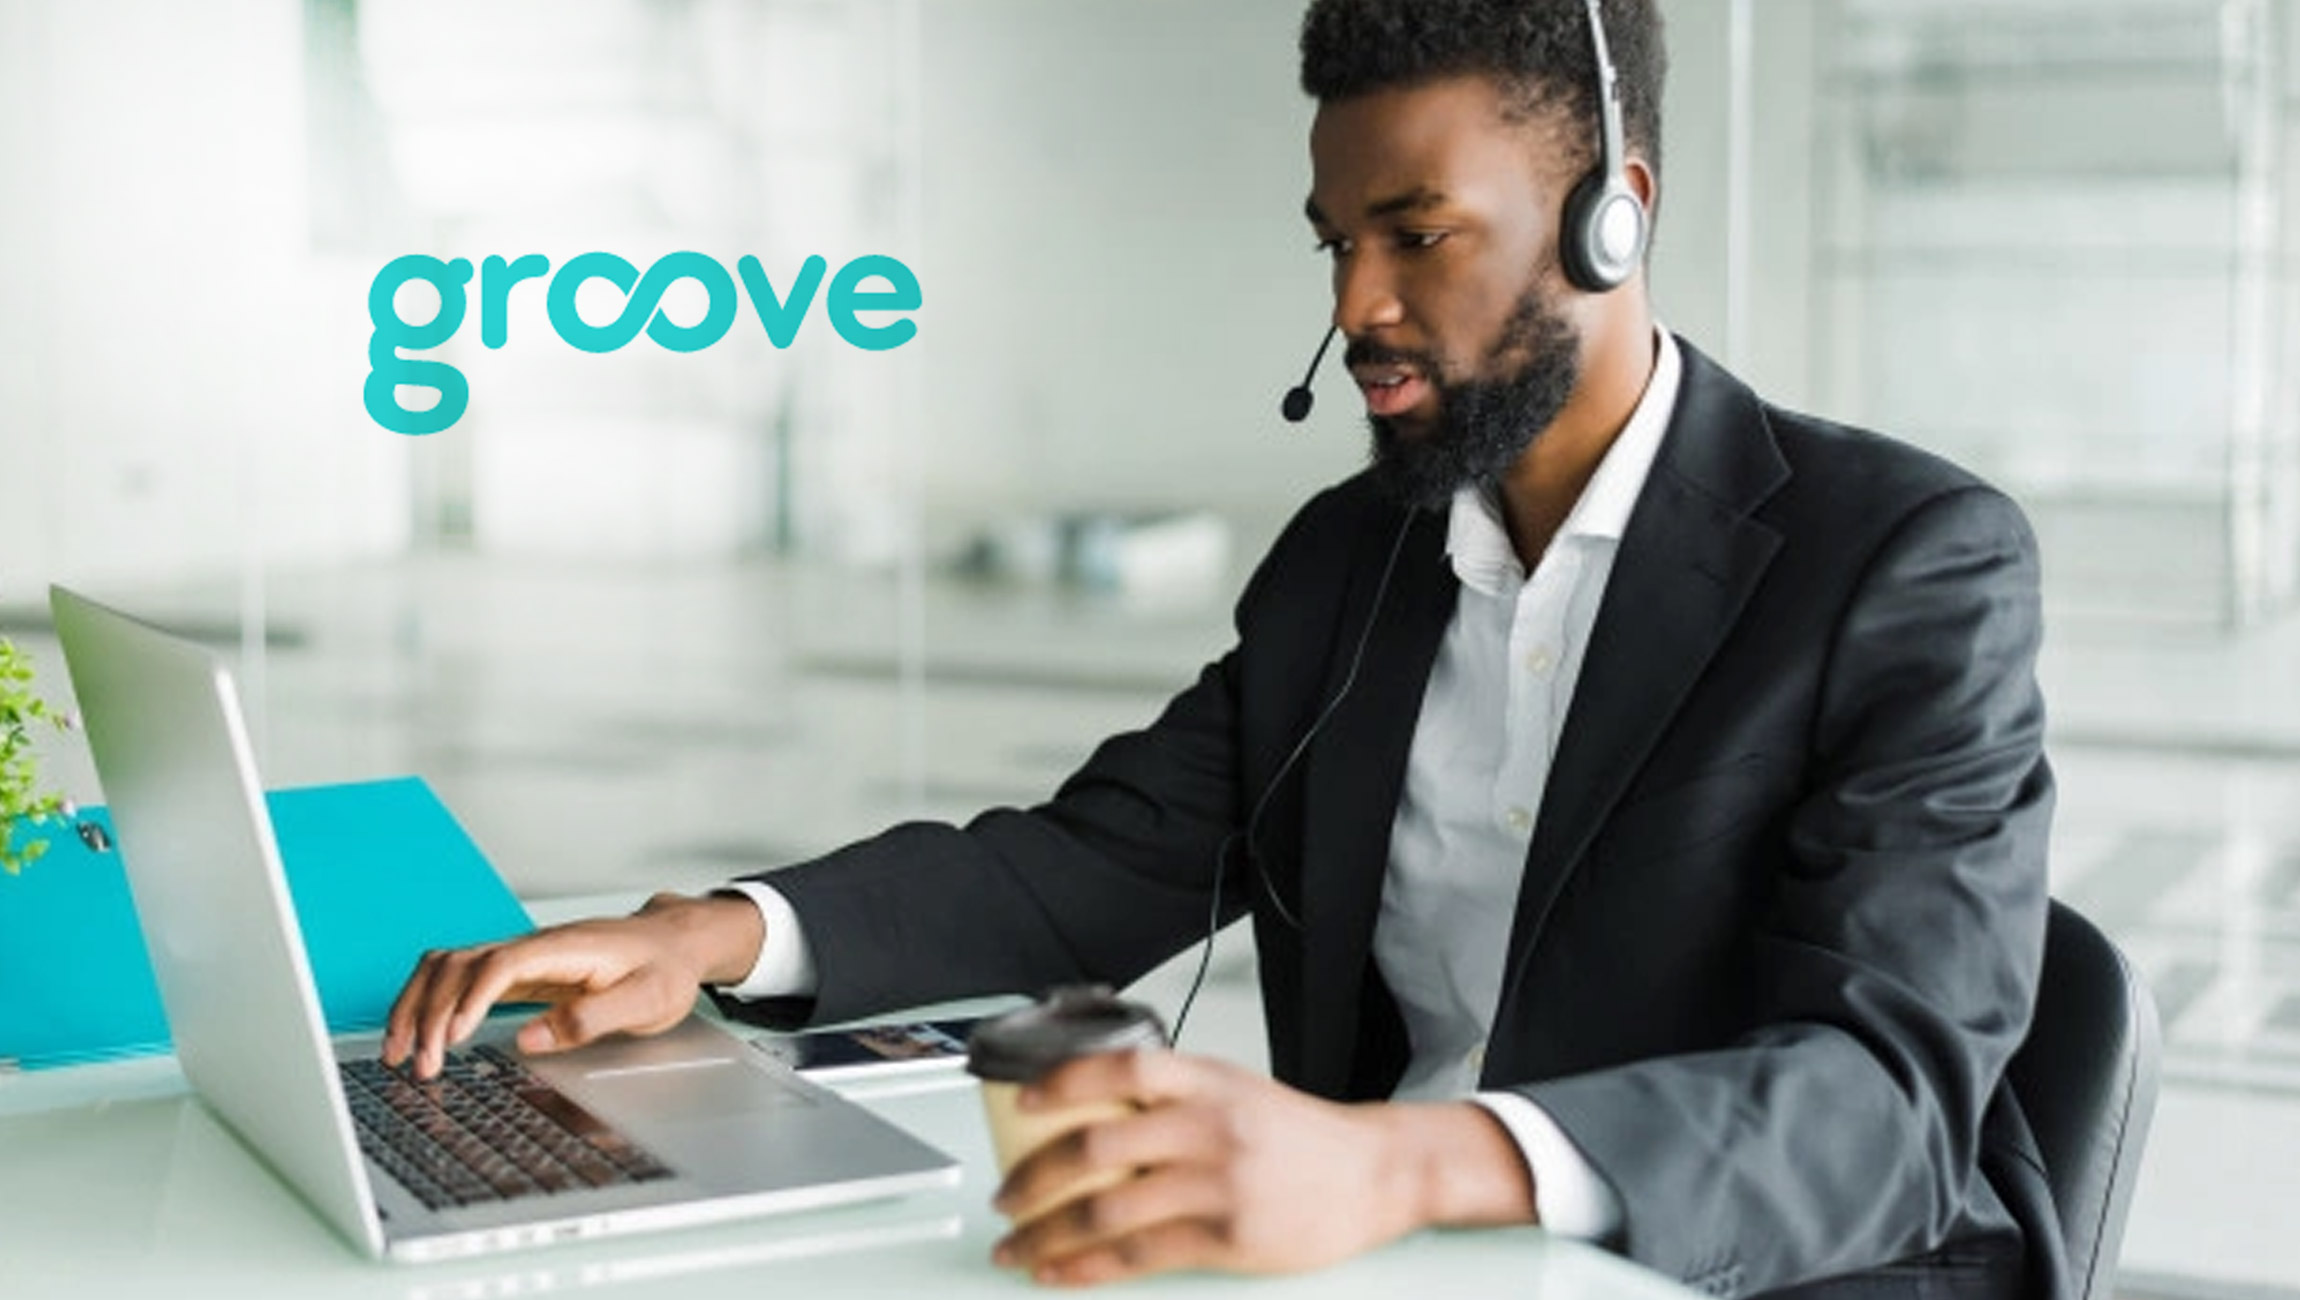 Groove Is the Highest-Rated Sales Engagement Platform on G2 for Three Years in a Row